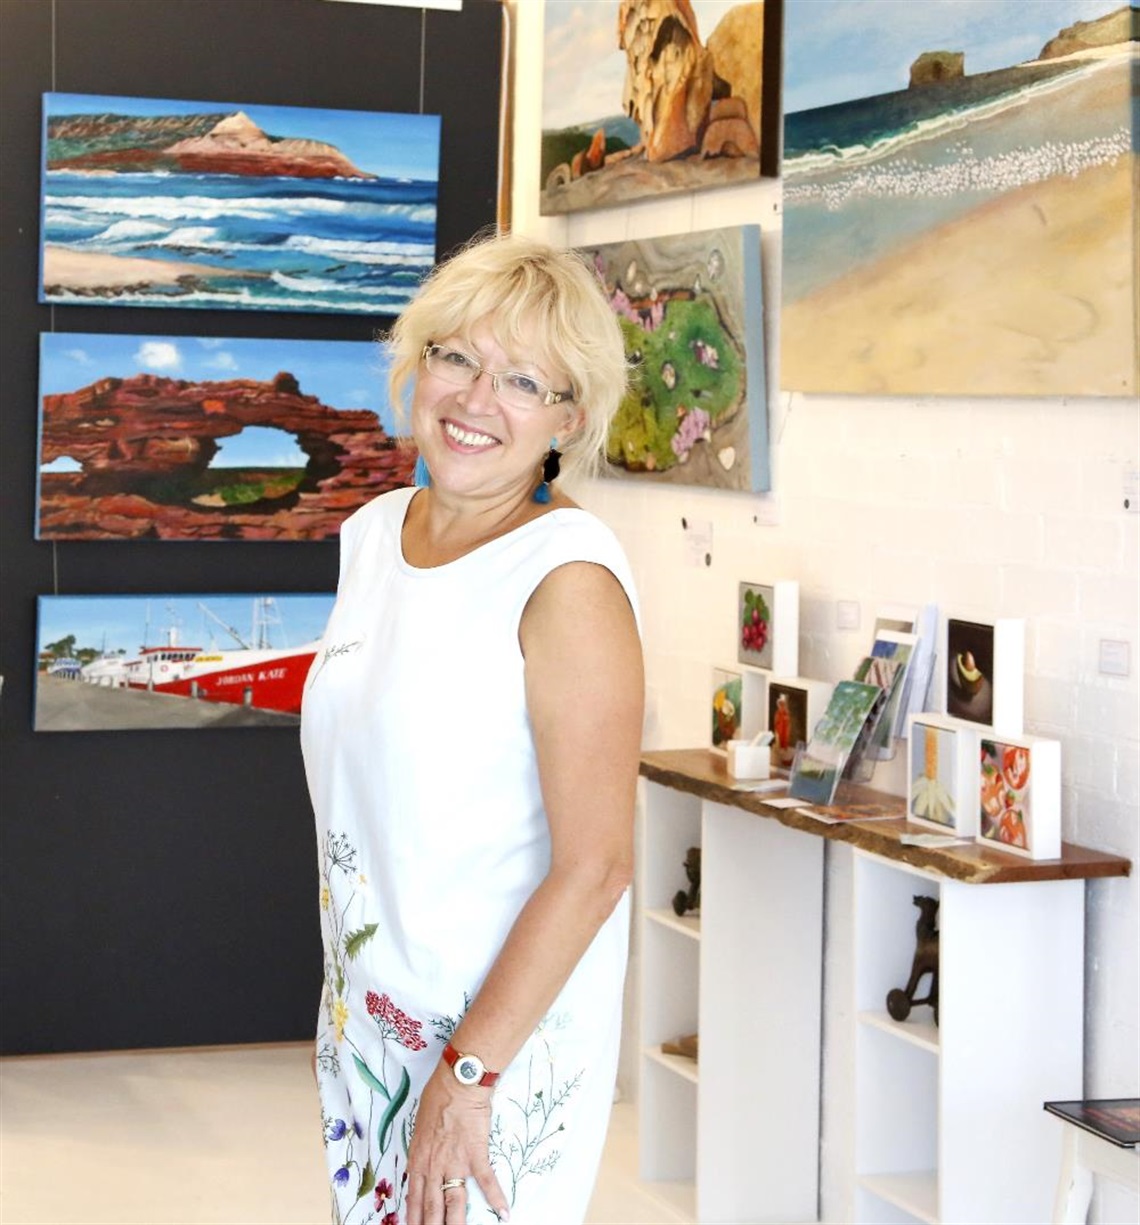 Artist, Iryna White, with her artworks in a gallery setting 